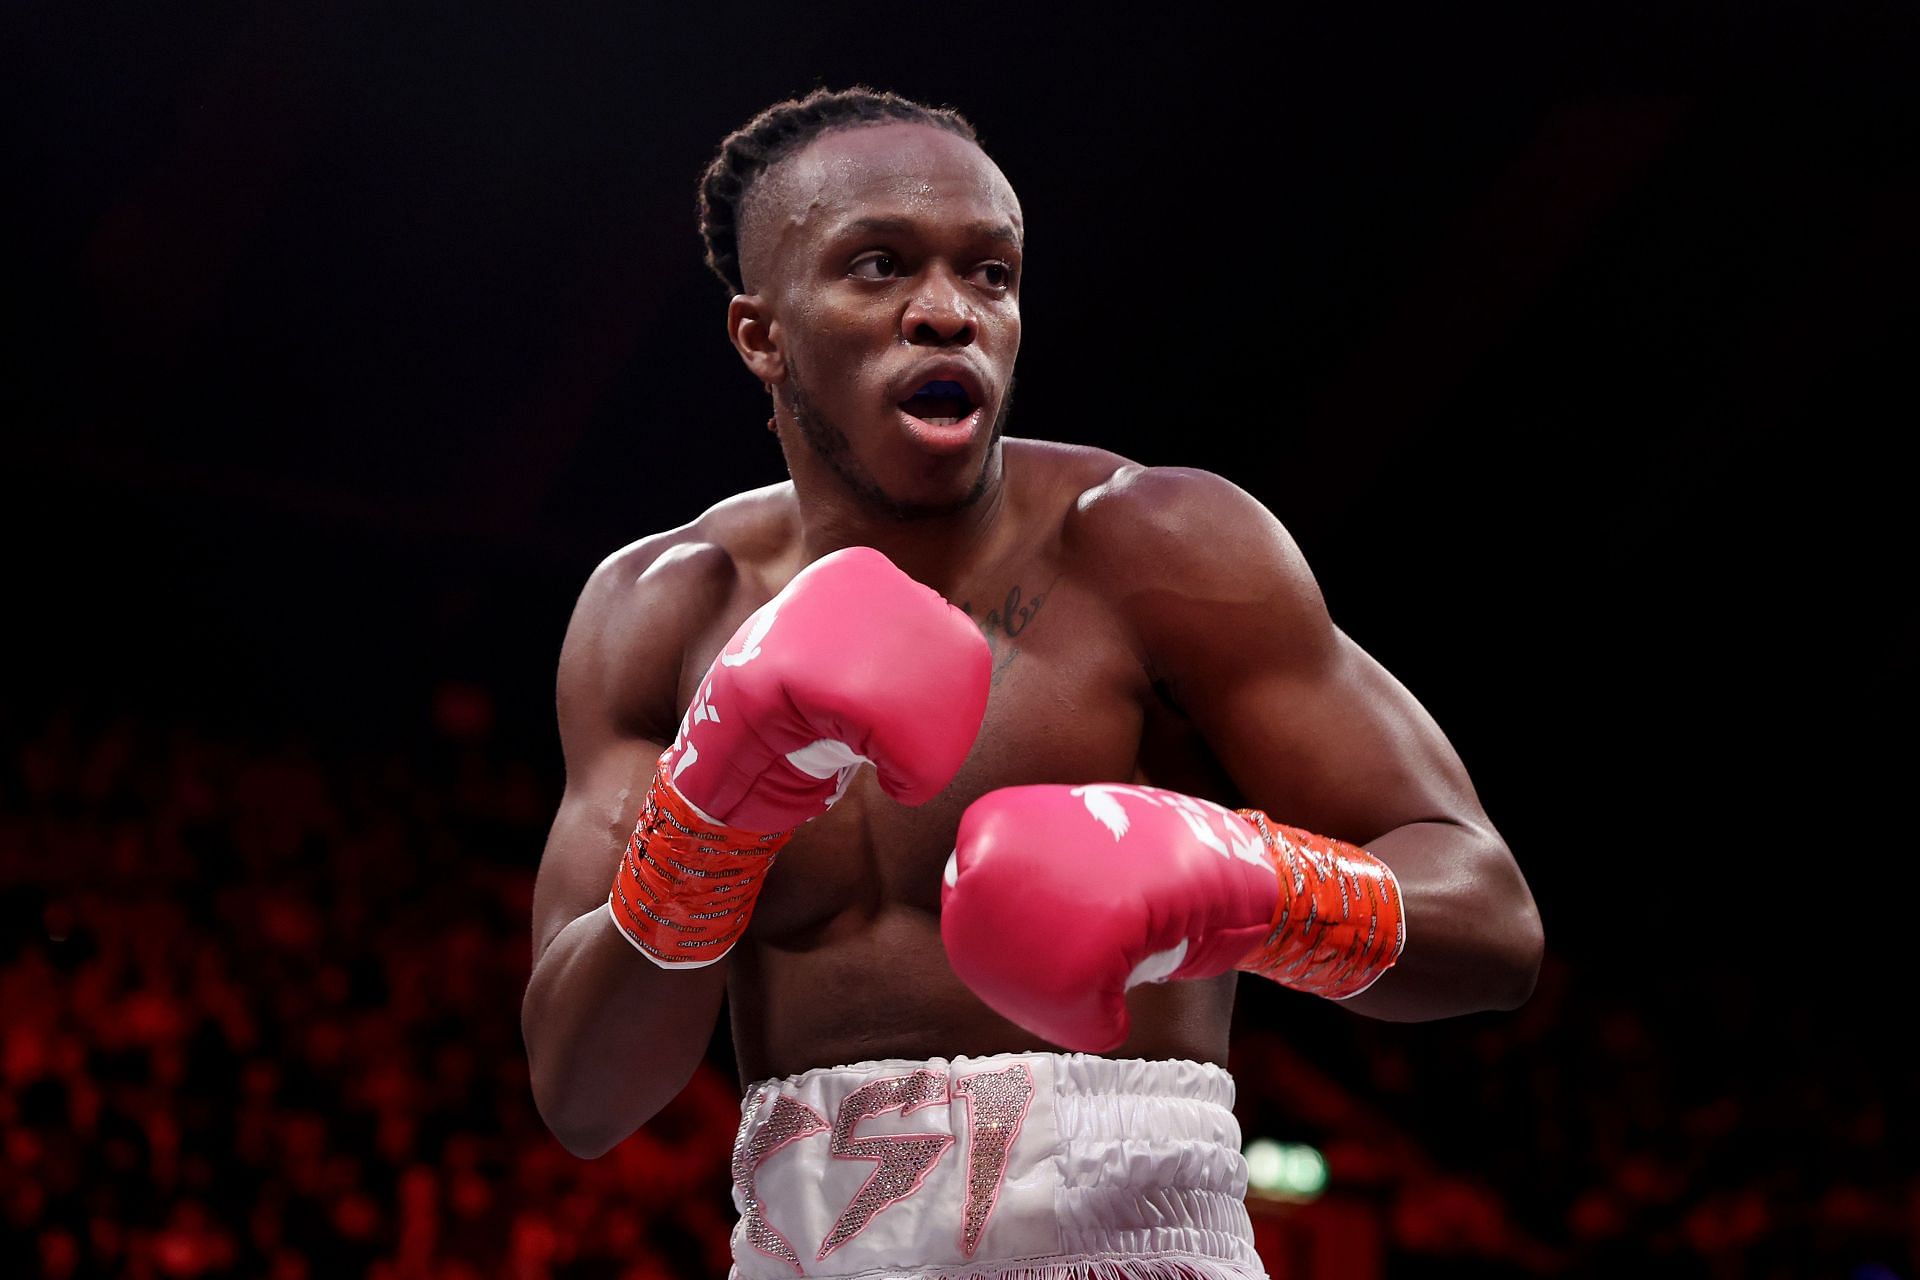 KSI to stage a tag team boxing match on the next Misfits Boxing undercard